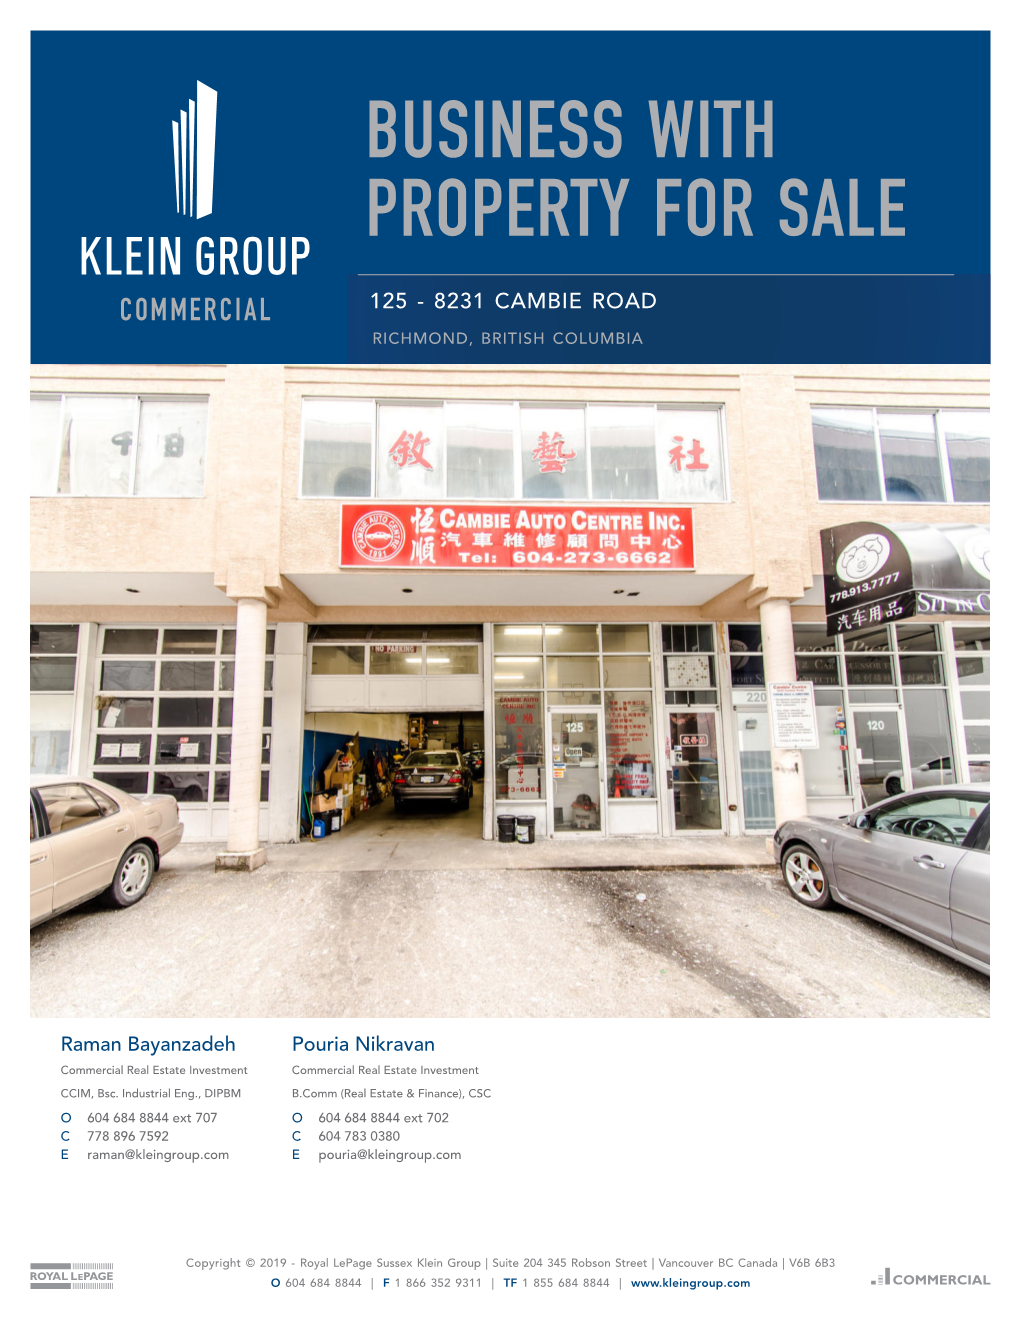 Business with Property for Sale